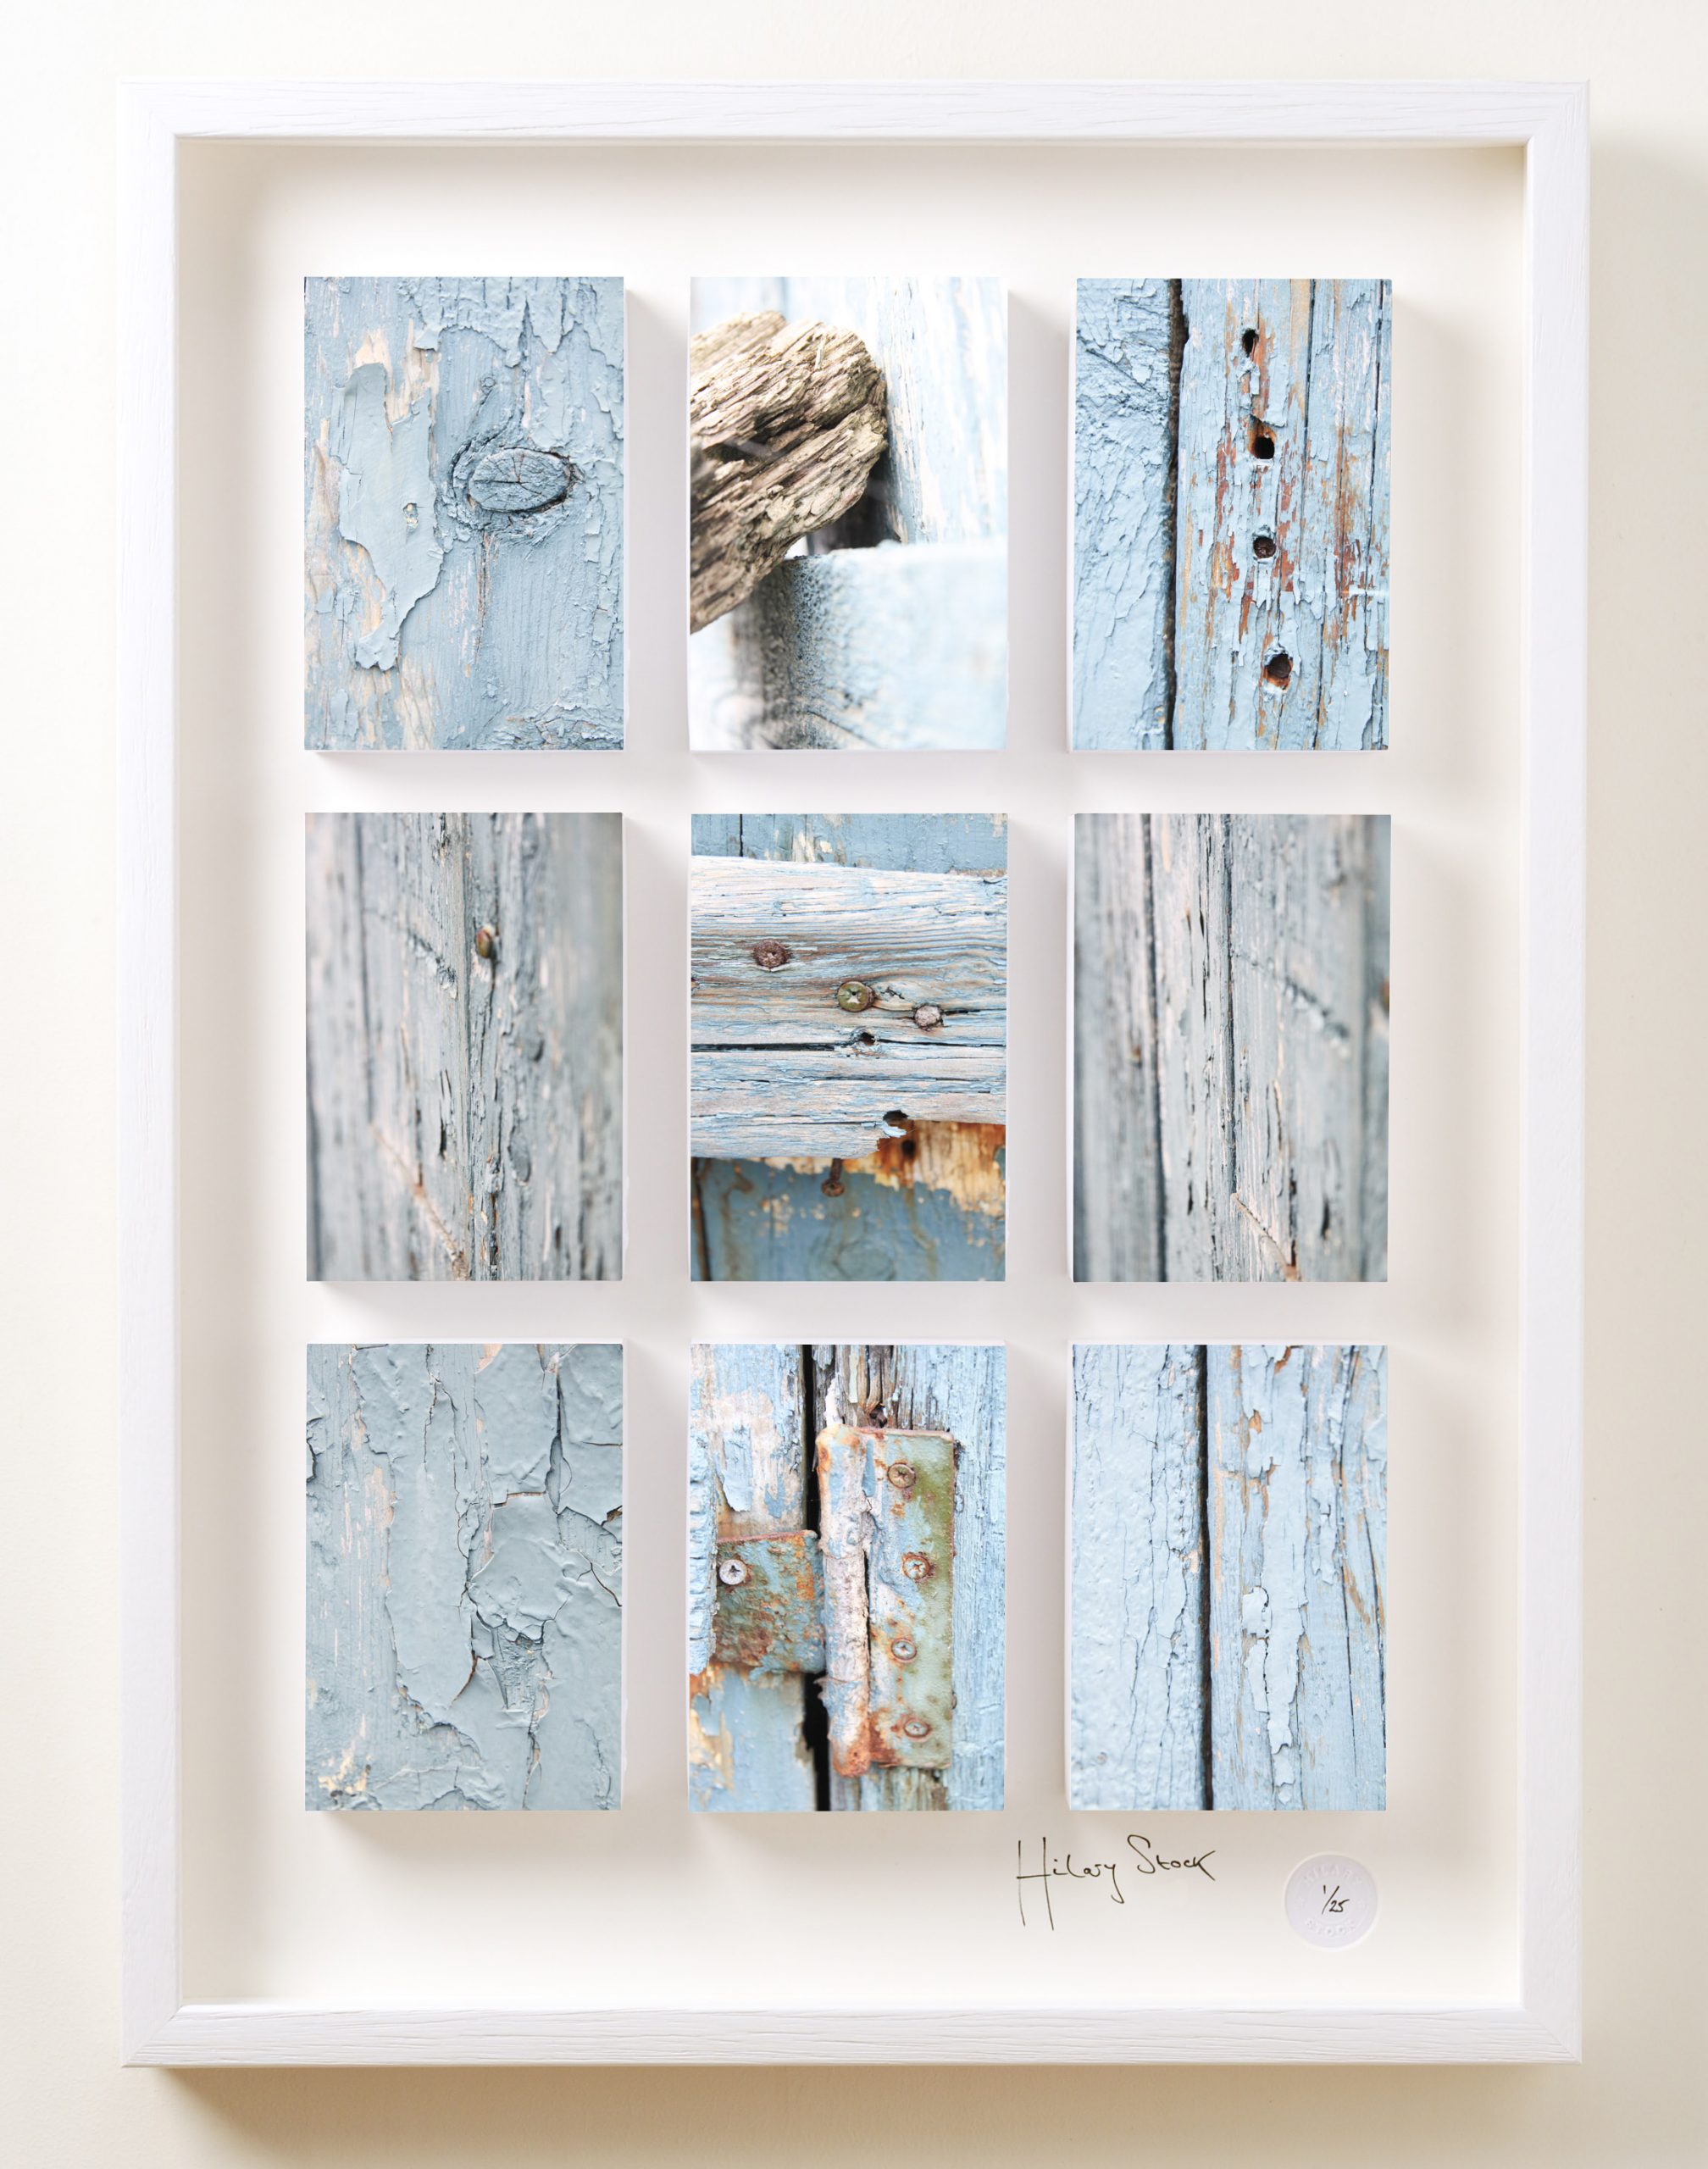 A collection of photographic fine art of Cornwall by Hilary Stock